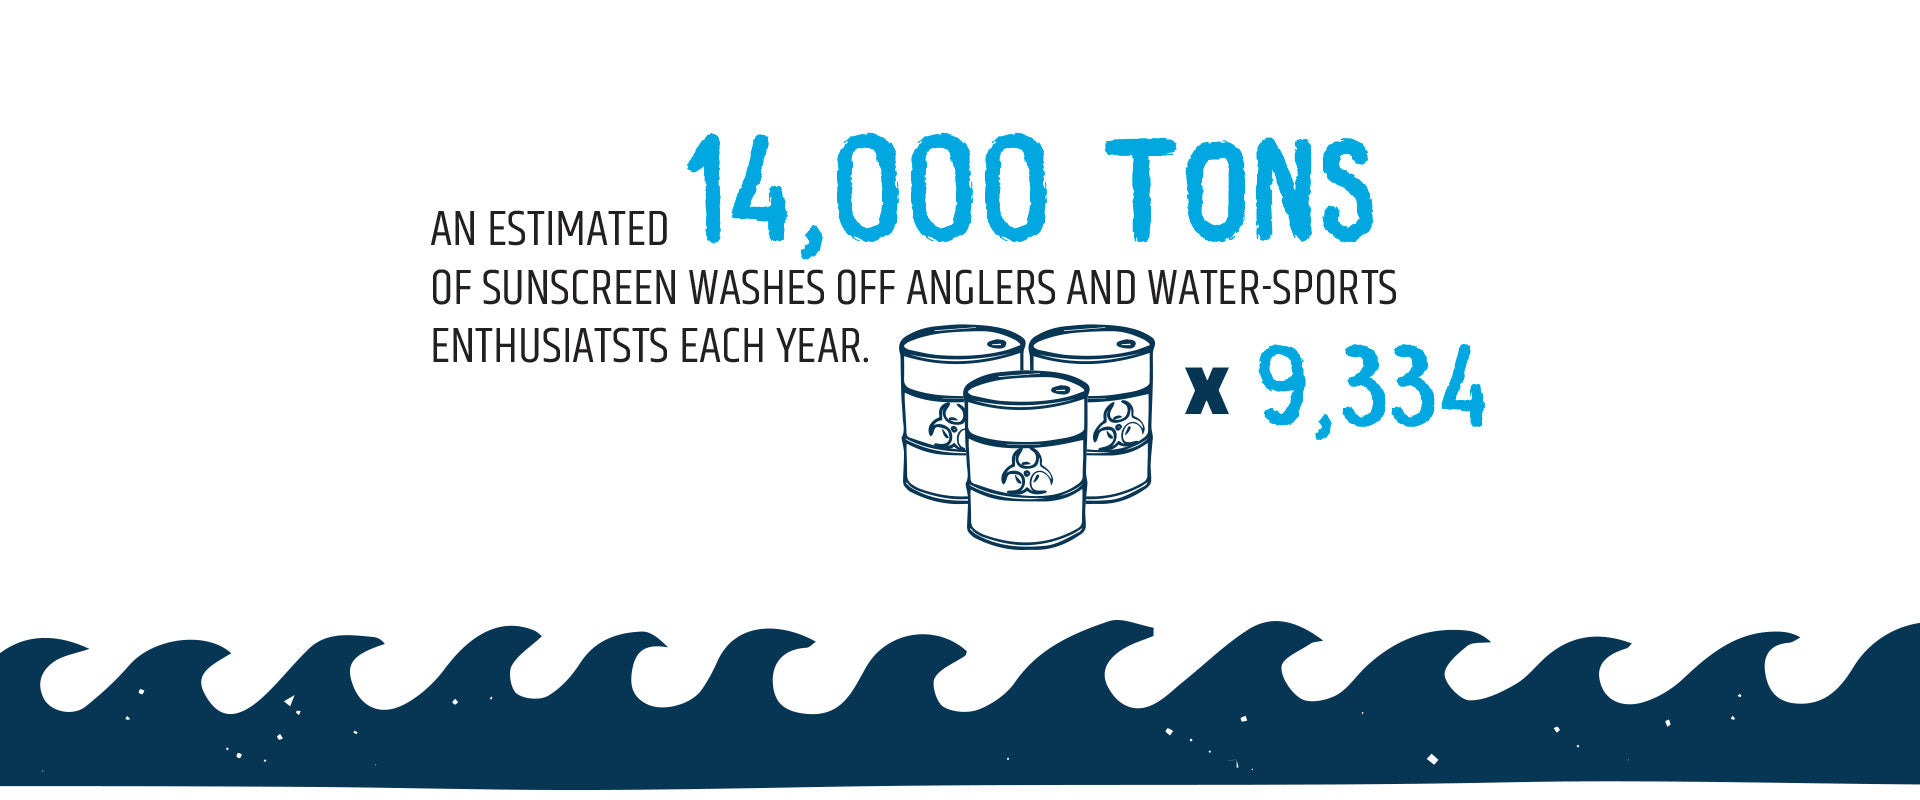 An estimated 14,000 tons of sunscreen washes off anglers and water sport enthusiasts each year. That's 9,334 55-gallon oil drums full.